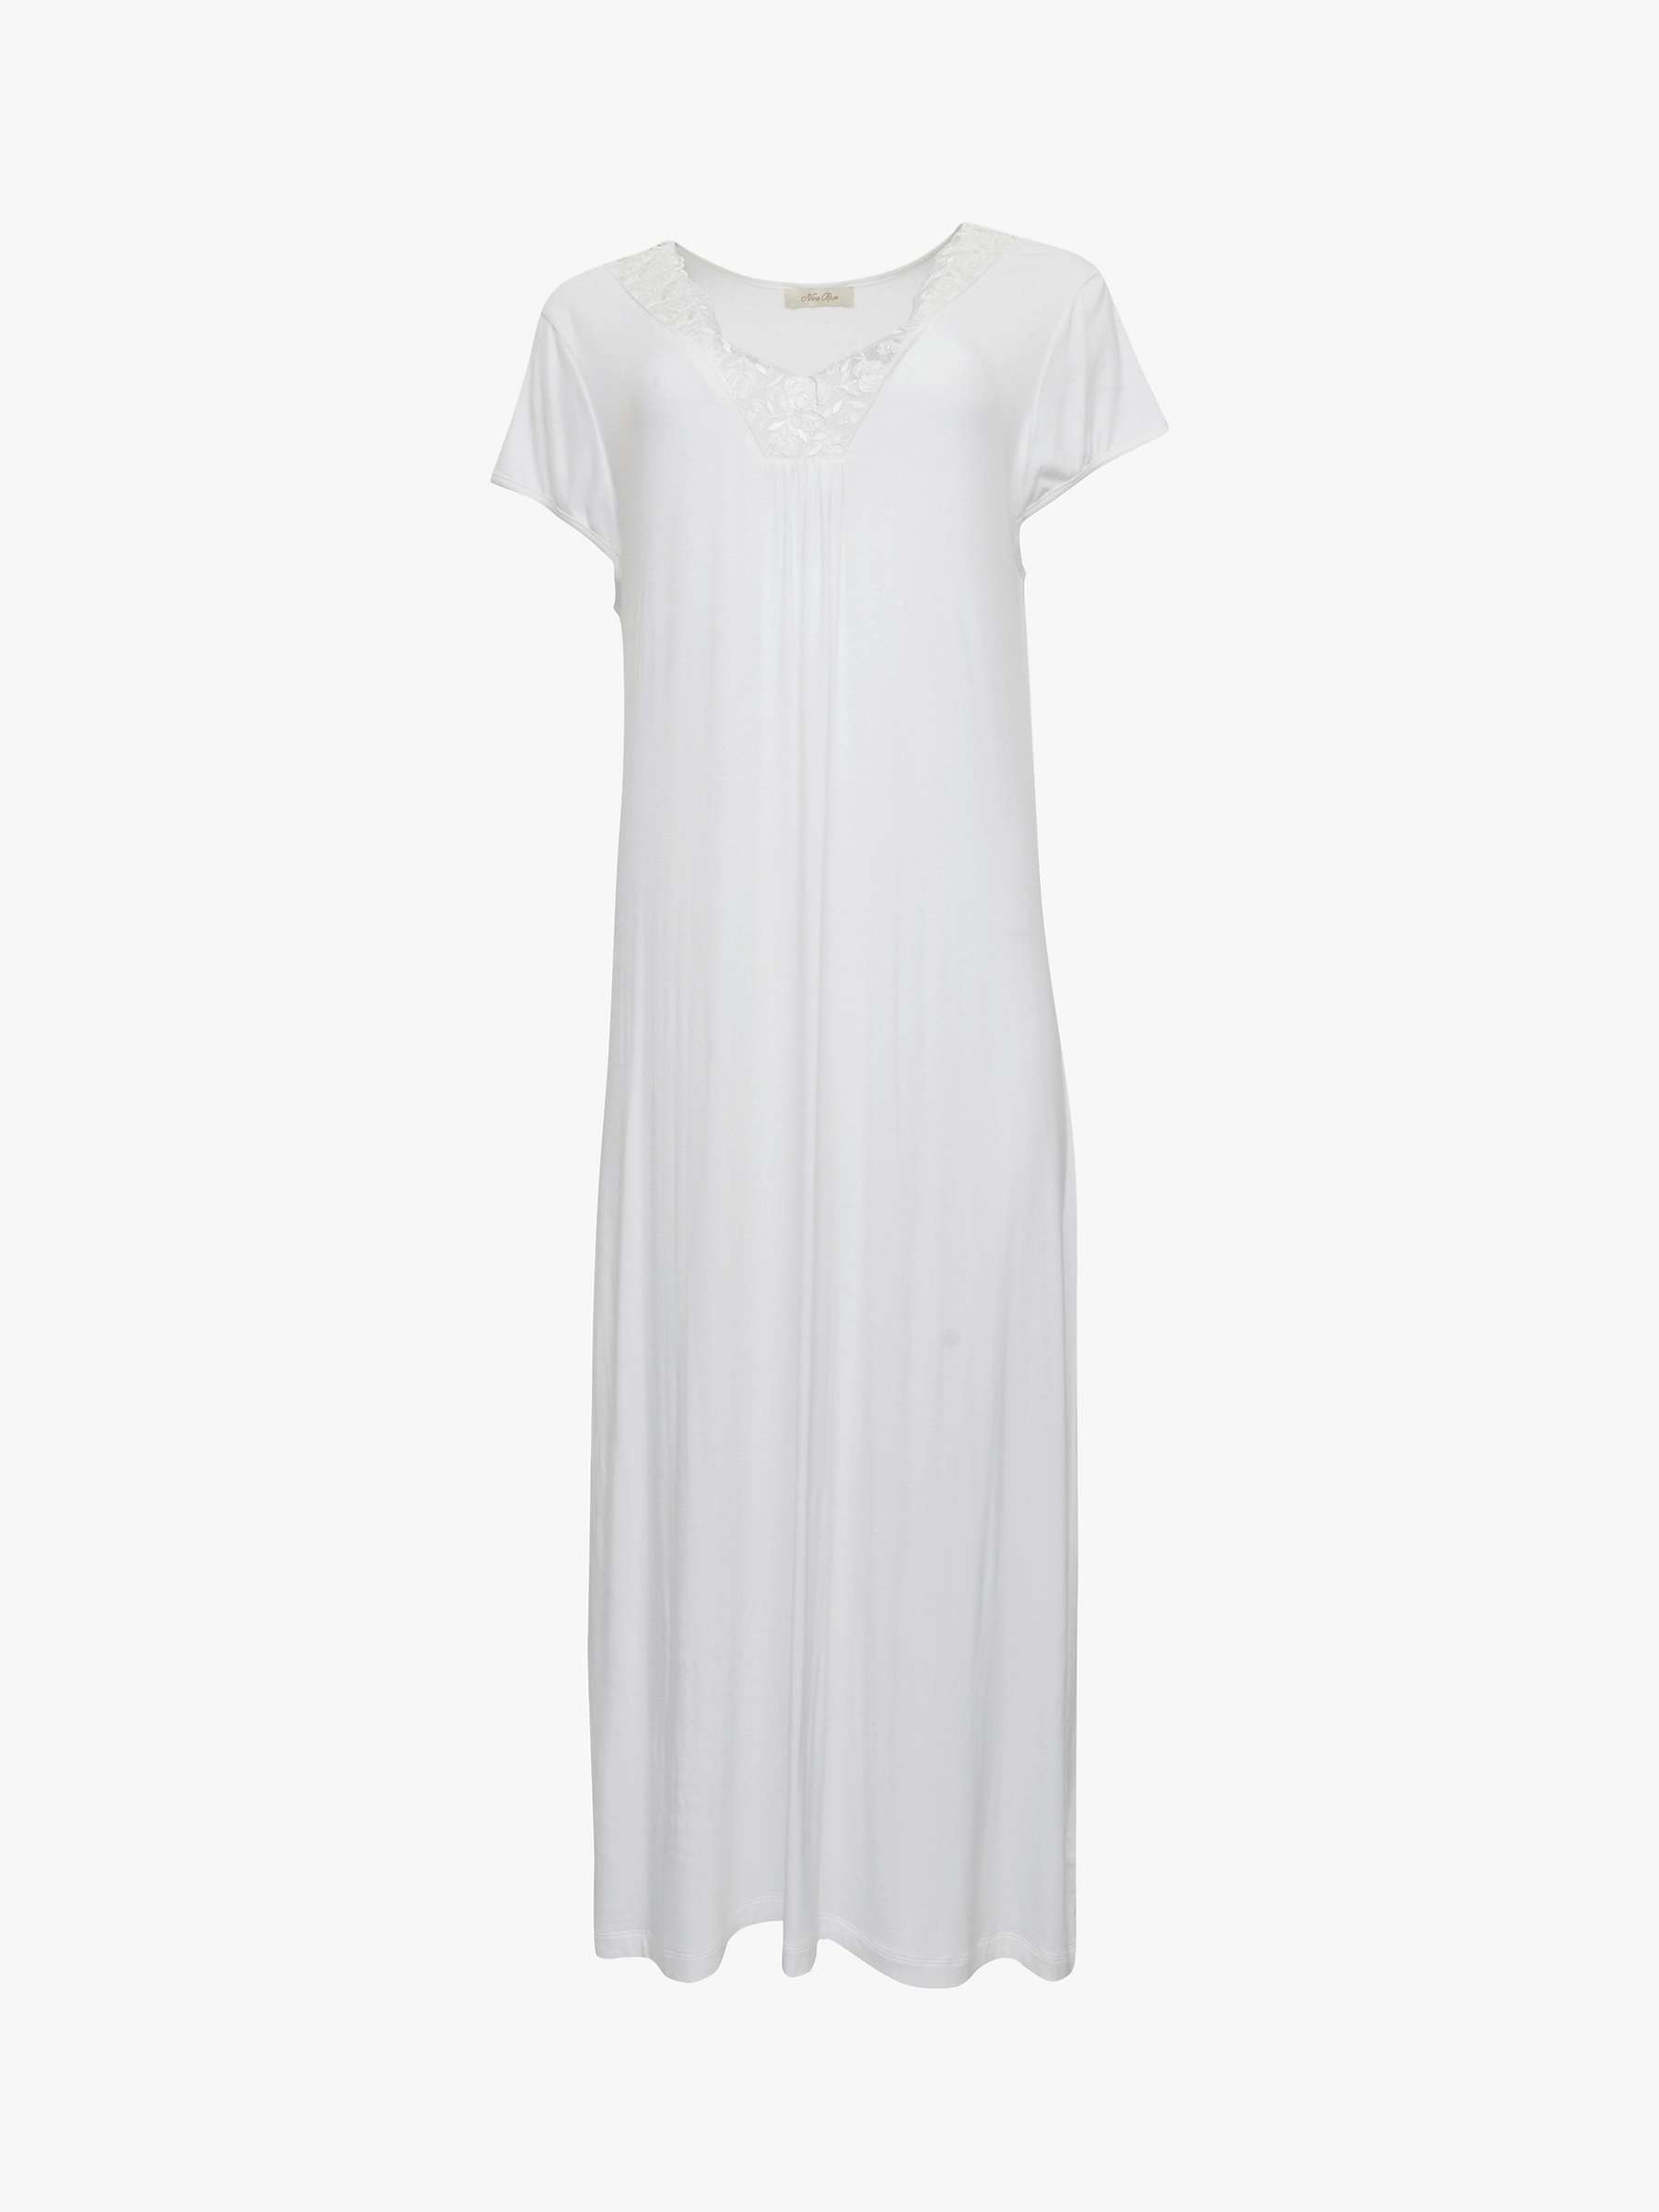 Buy Cyberjammies Evette Lace Trim Nightdress, White Online at johnlewis.com